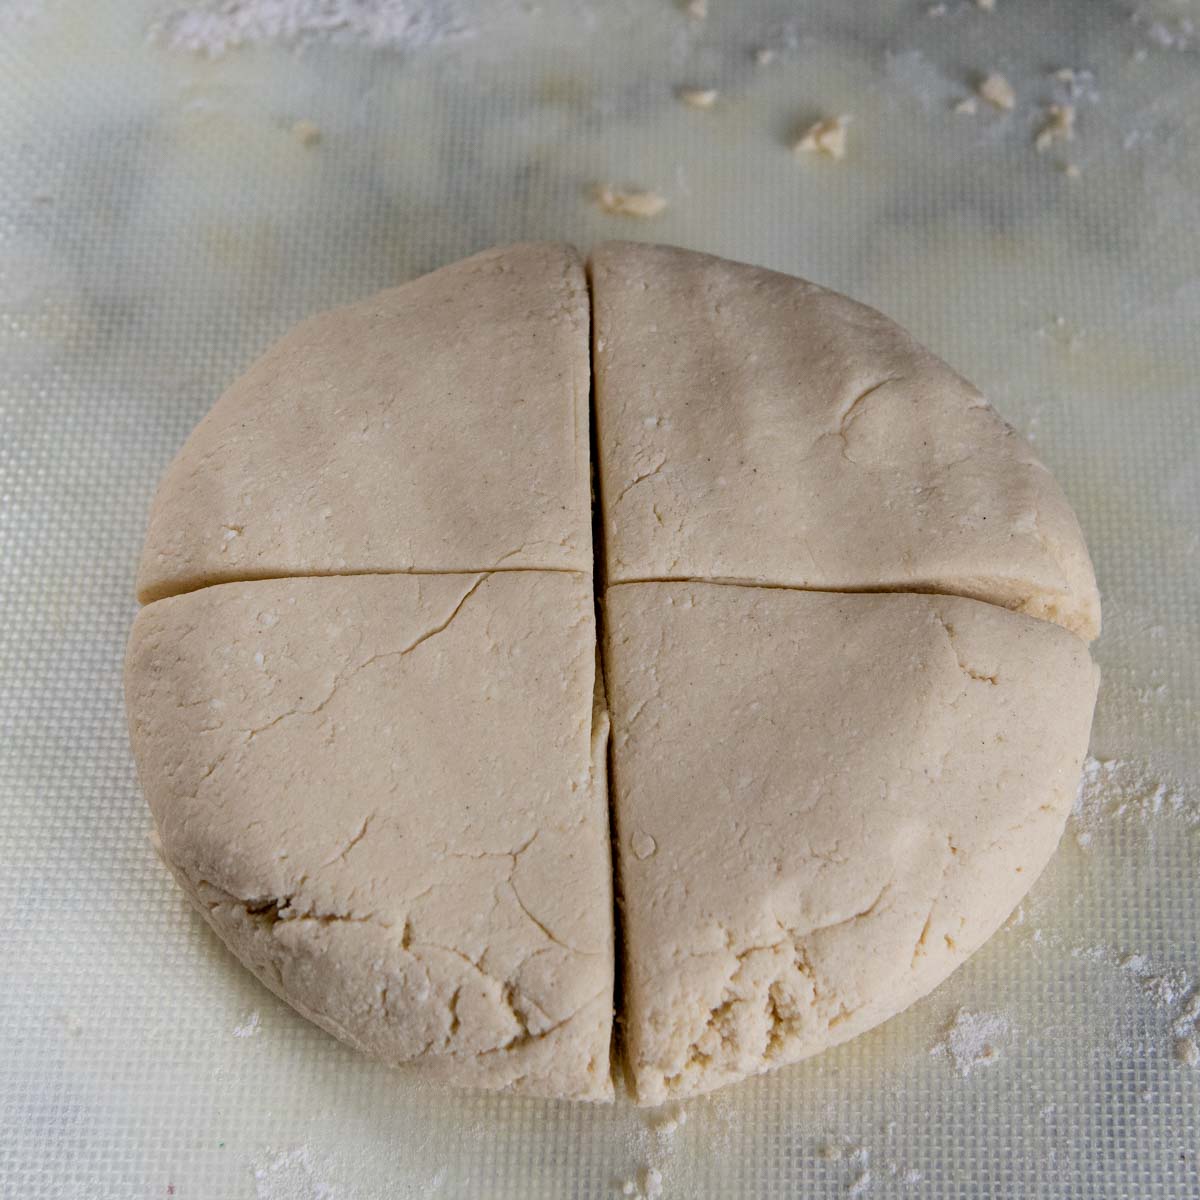 the dough flattened into a disc and cut into fourths.